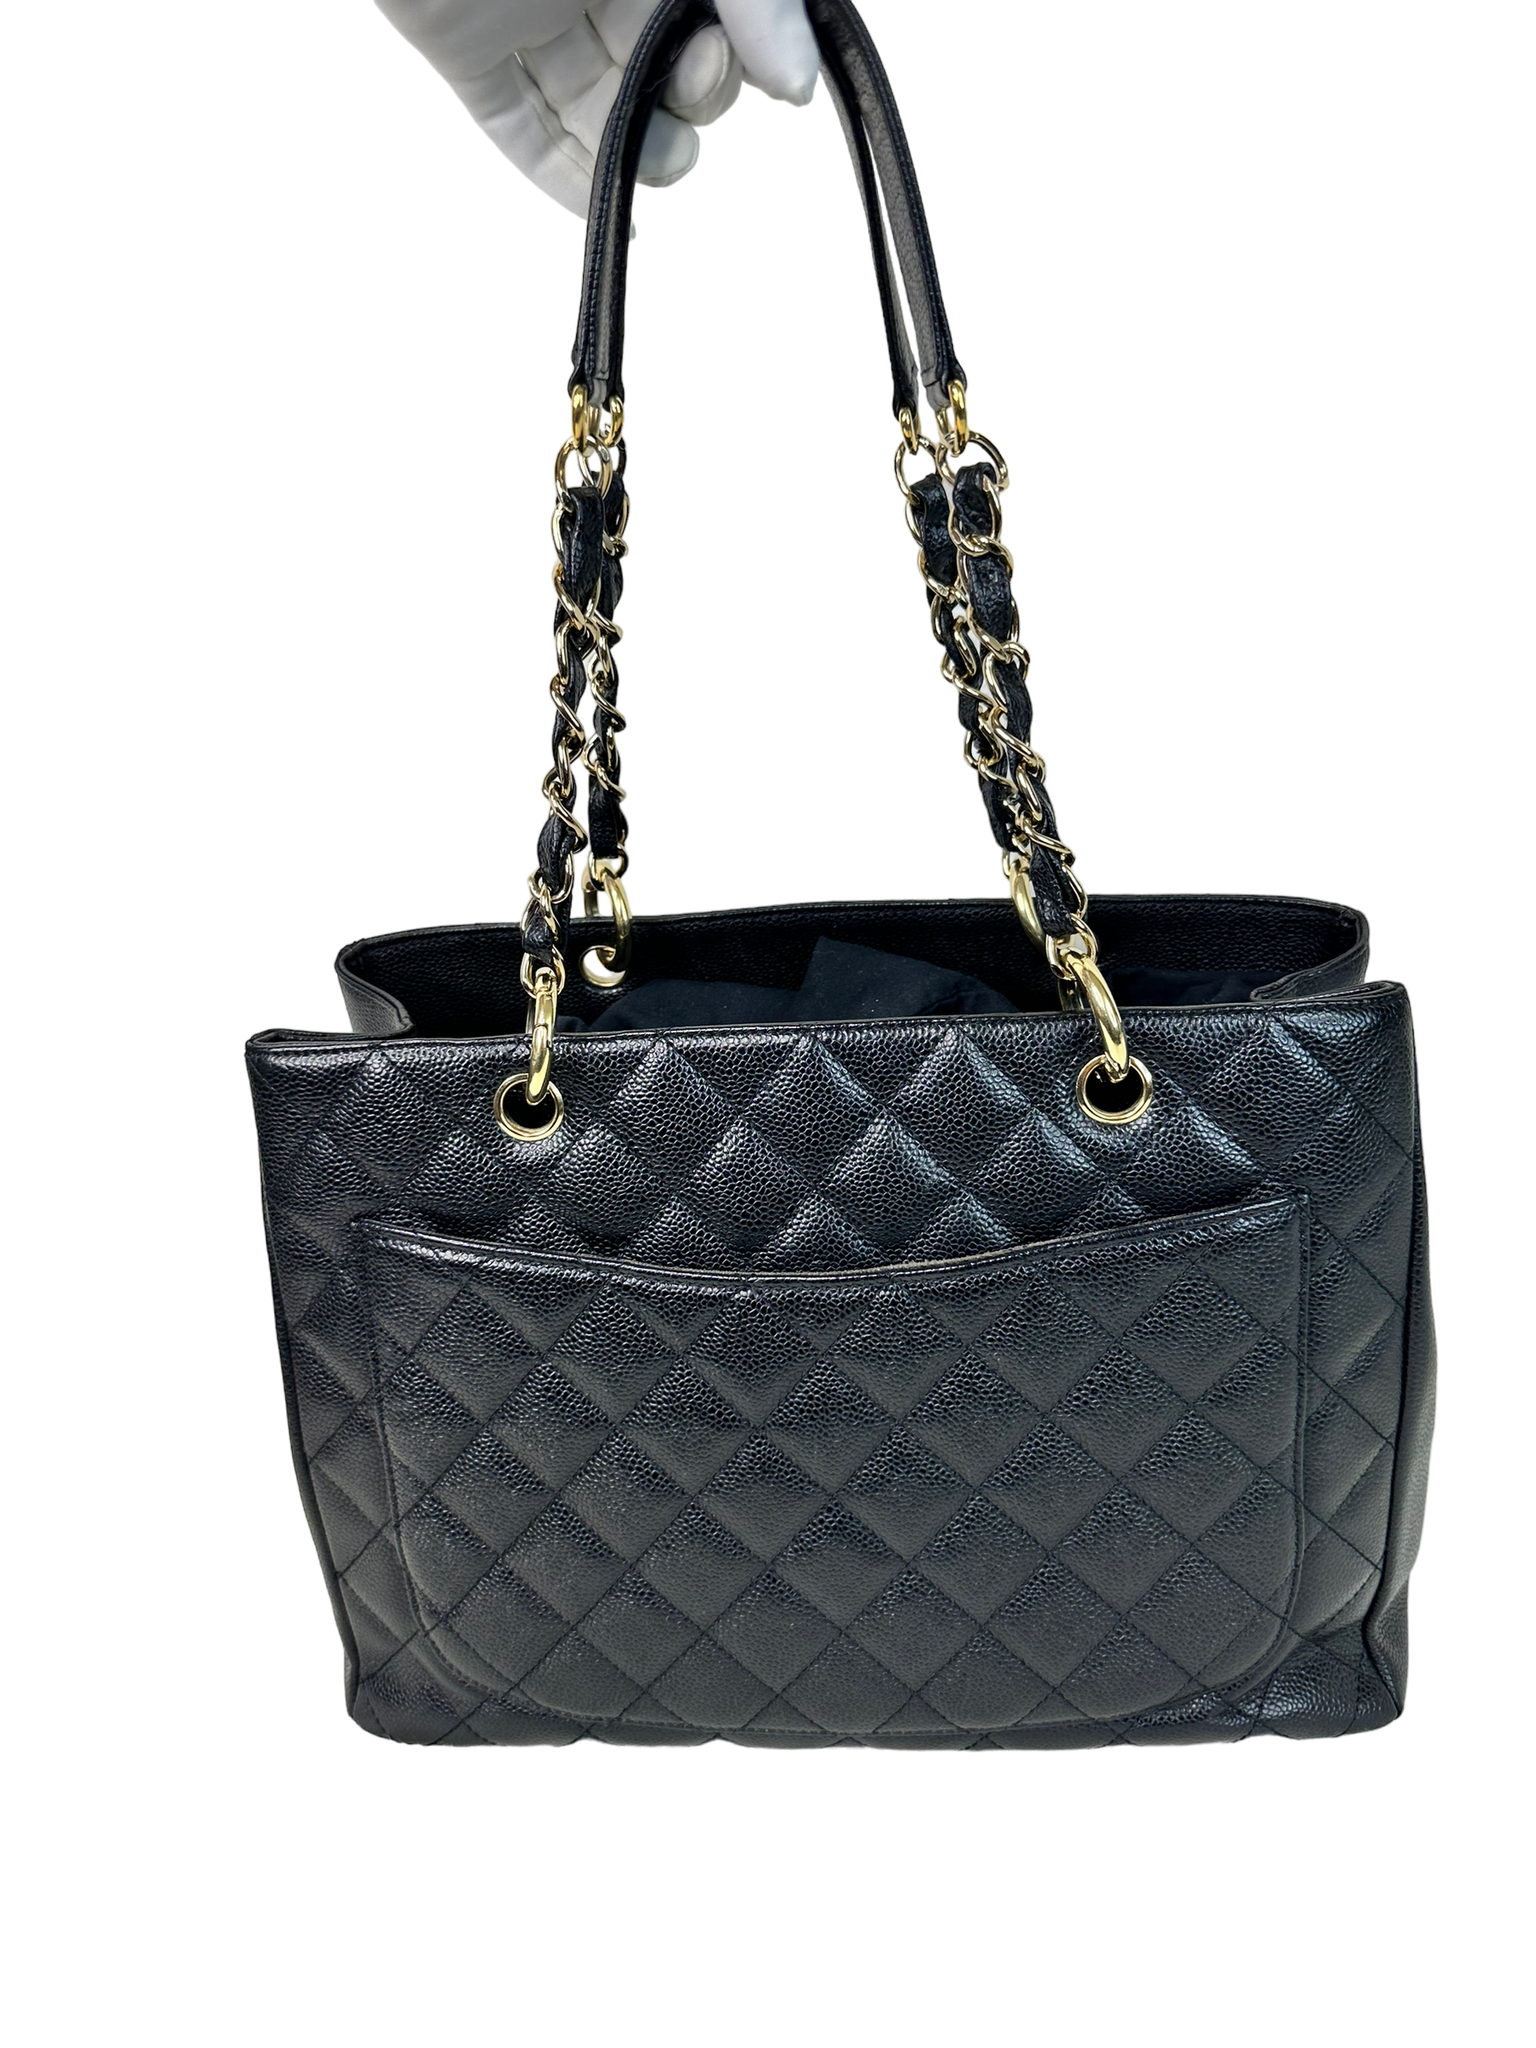 CHANEL GRAND SHOPPING BLACK TOTE IN CAVIAR LEATHER IN GOLD HARDWARE –  EVERYPOSH